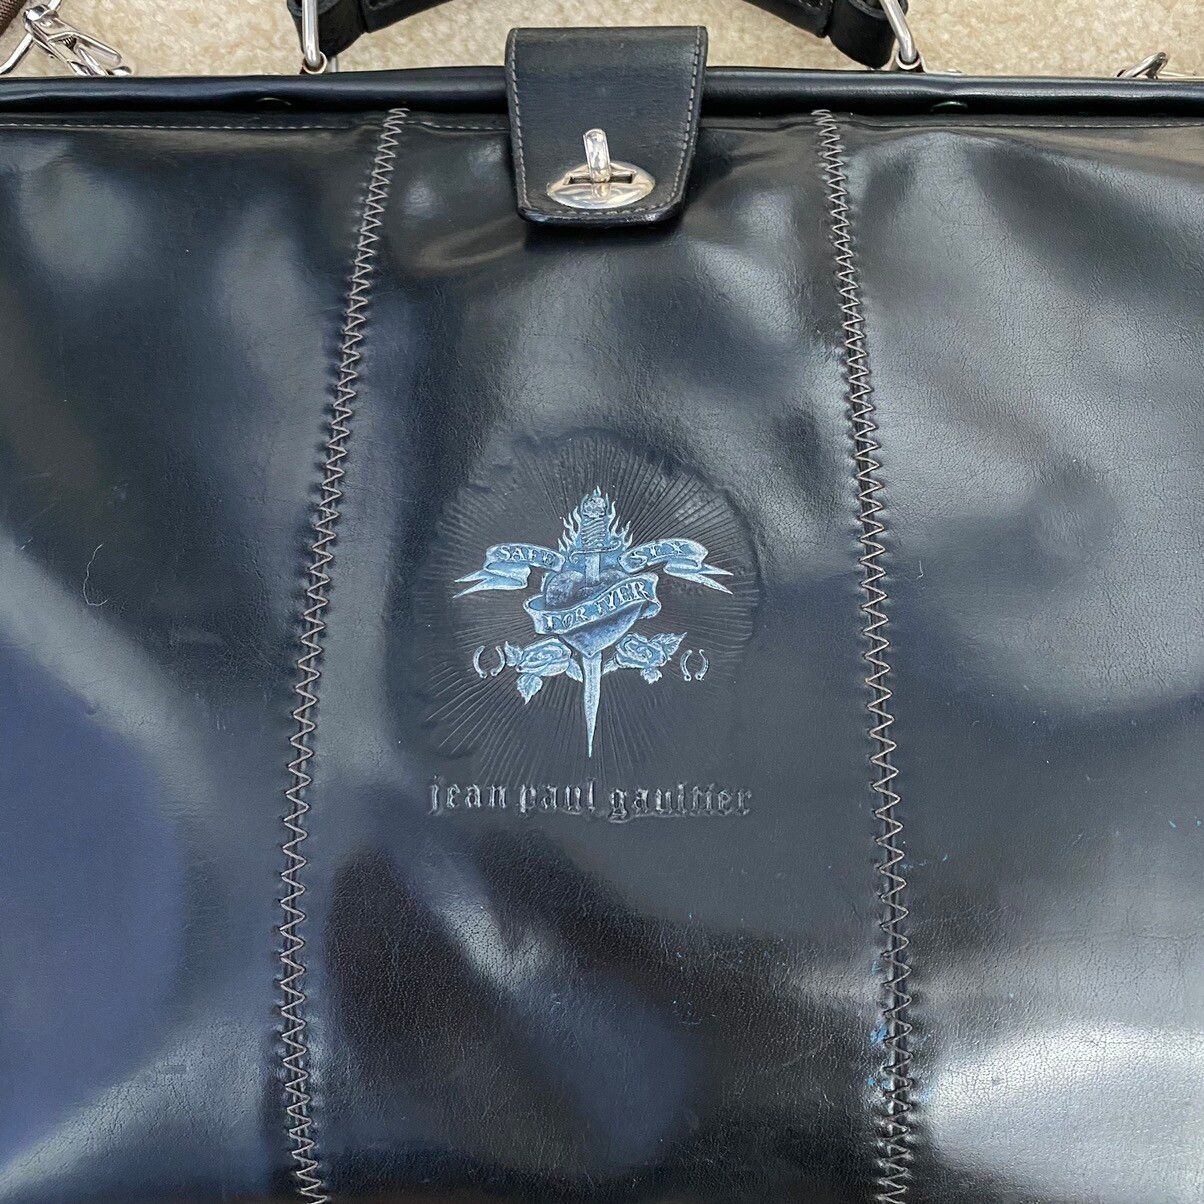 Jean Paul Gaultier Jean Paul Gaultier “Safe Sex Forever” Bag Size ONE SIZE - 2 Preview